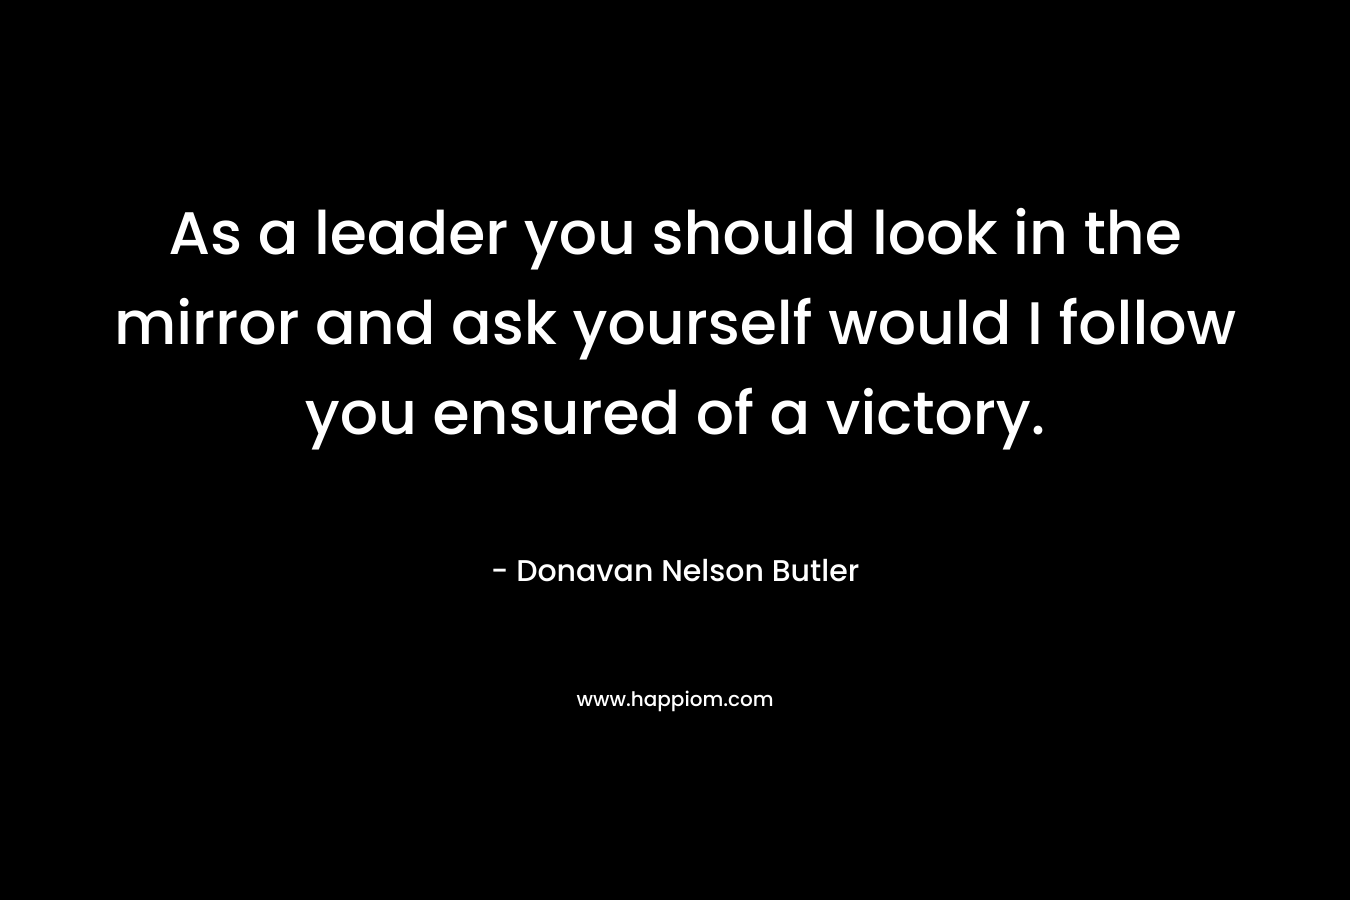 As a leader you should look in the mirror and ask yourself would I follow you ensured of a victory.